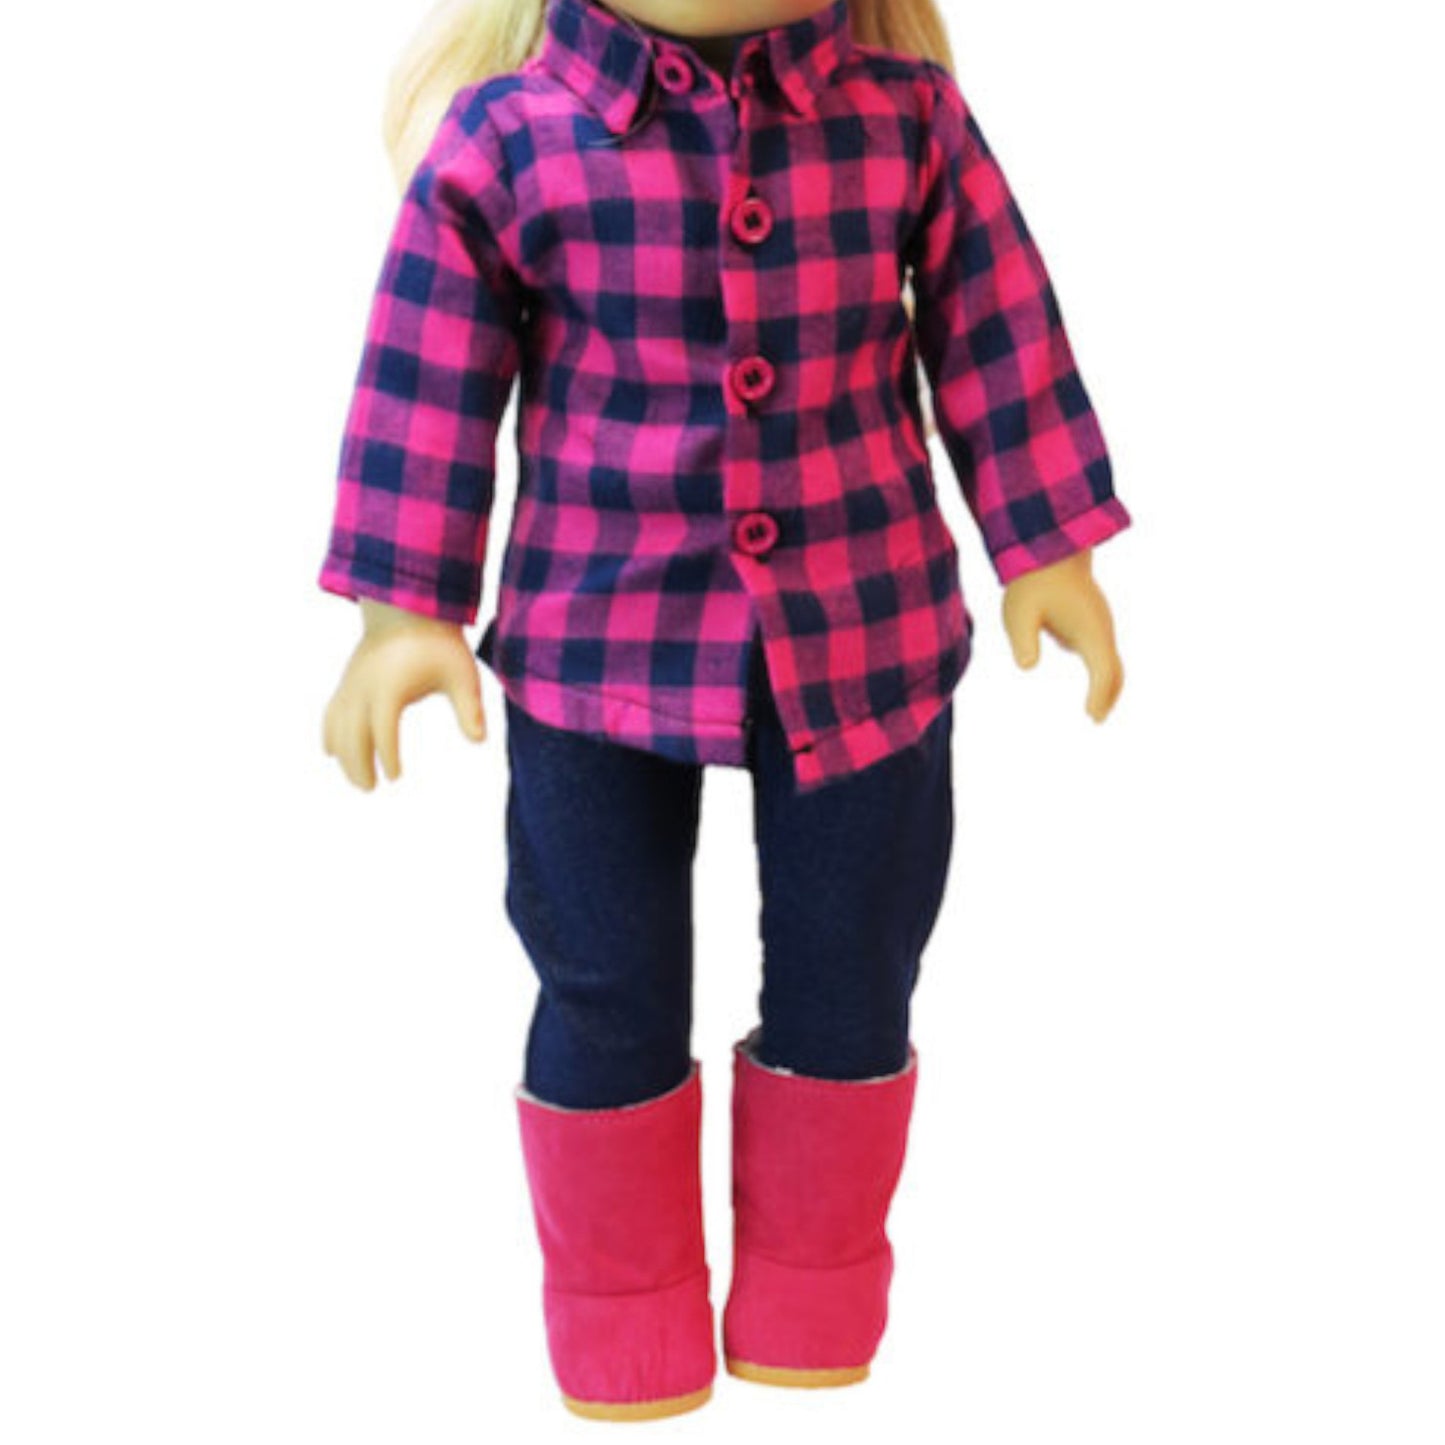 Navy and Pink Checkered Outfit for 18-inch dolls with doll